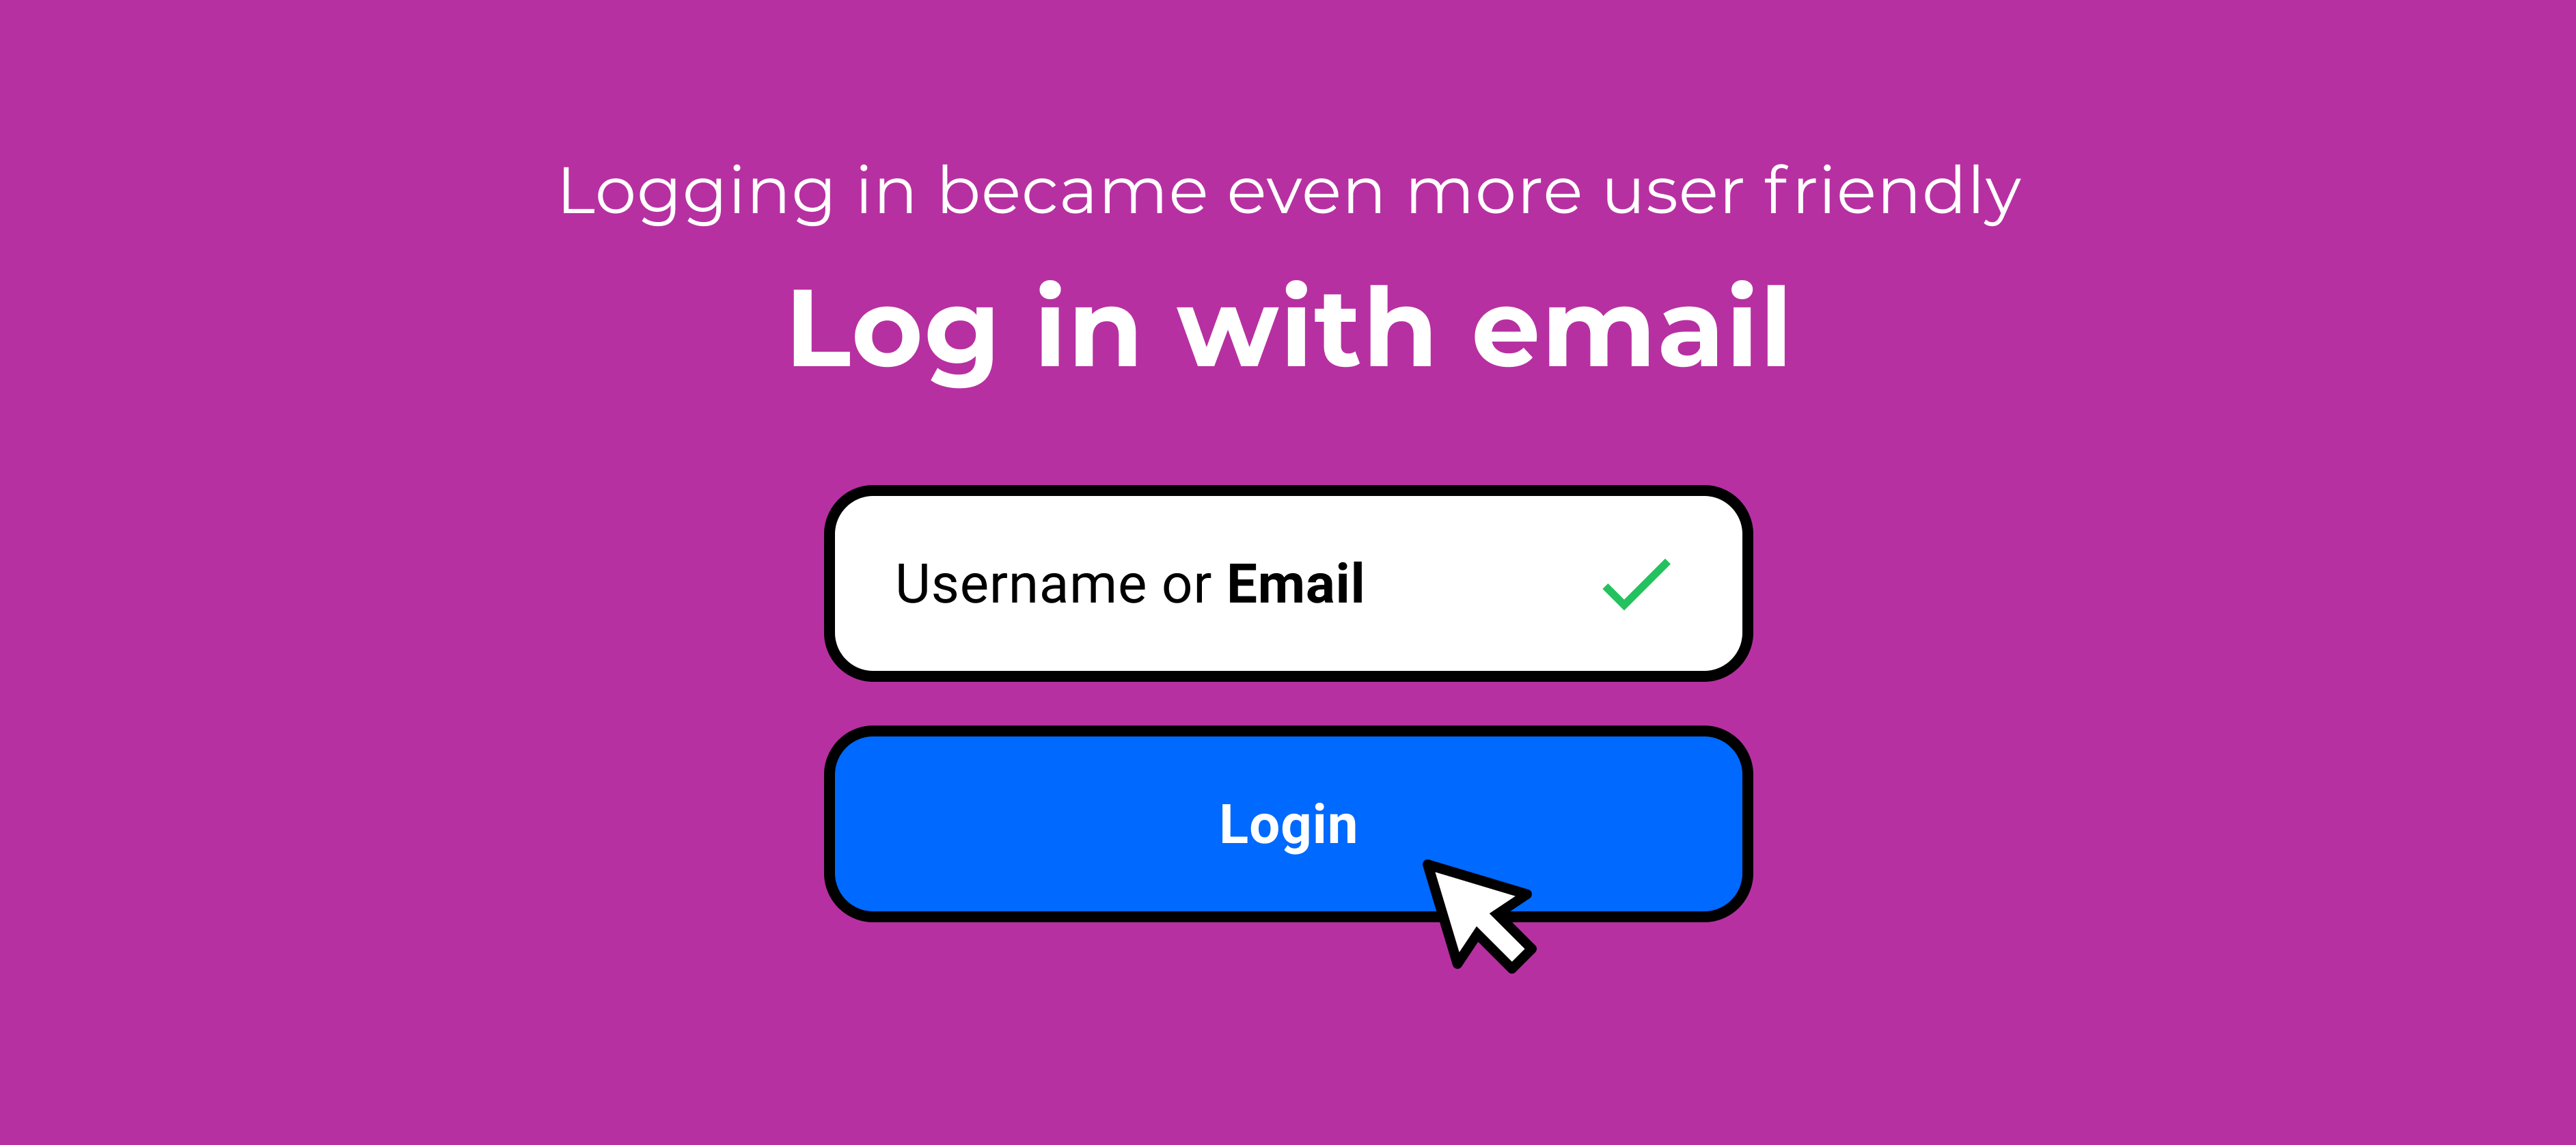 Log into community using email!!